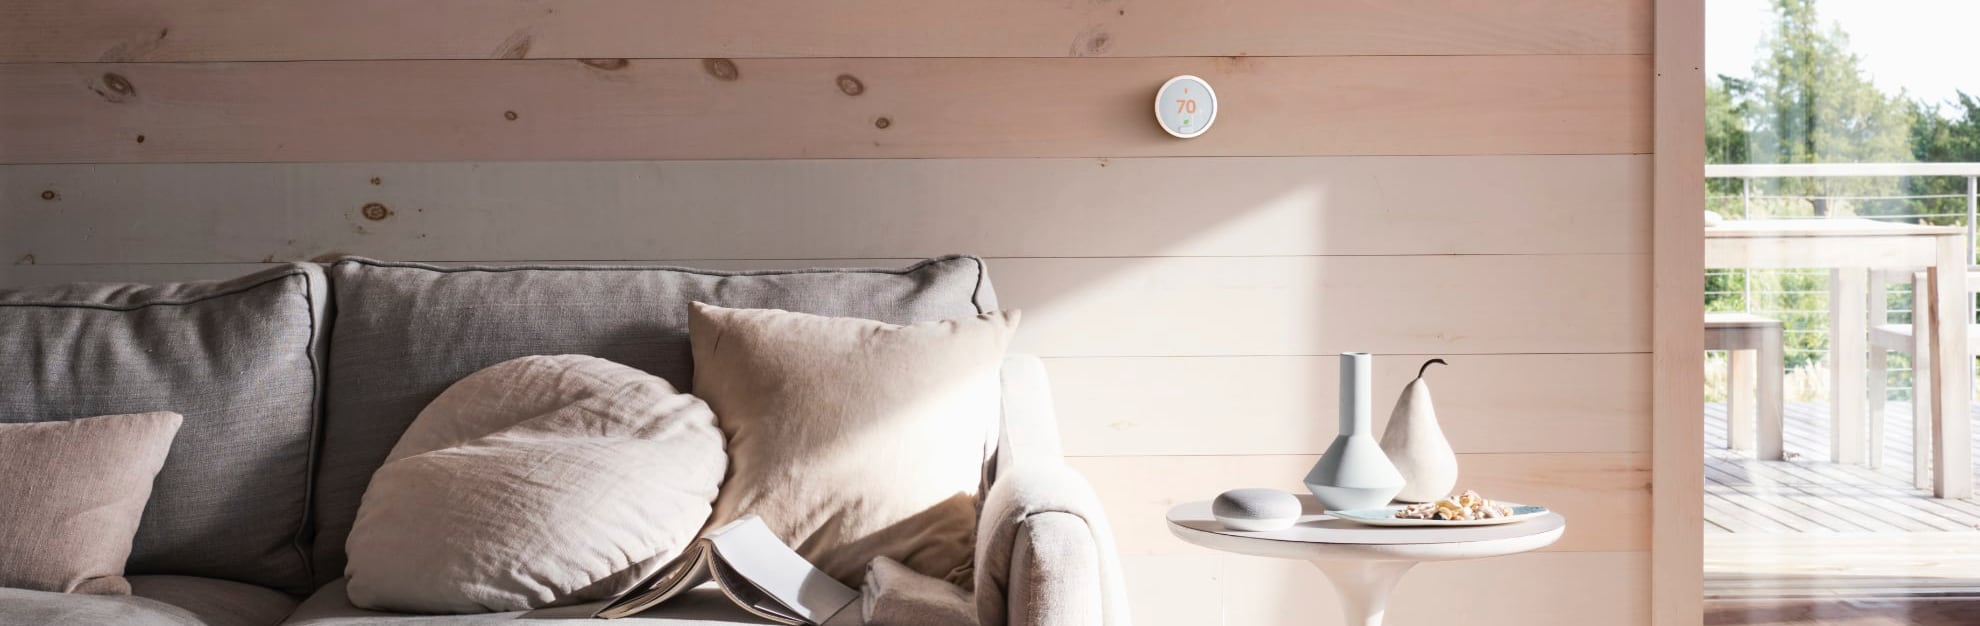 Vivint Home Automation in West Bloomfield